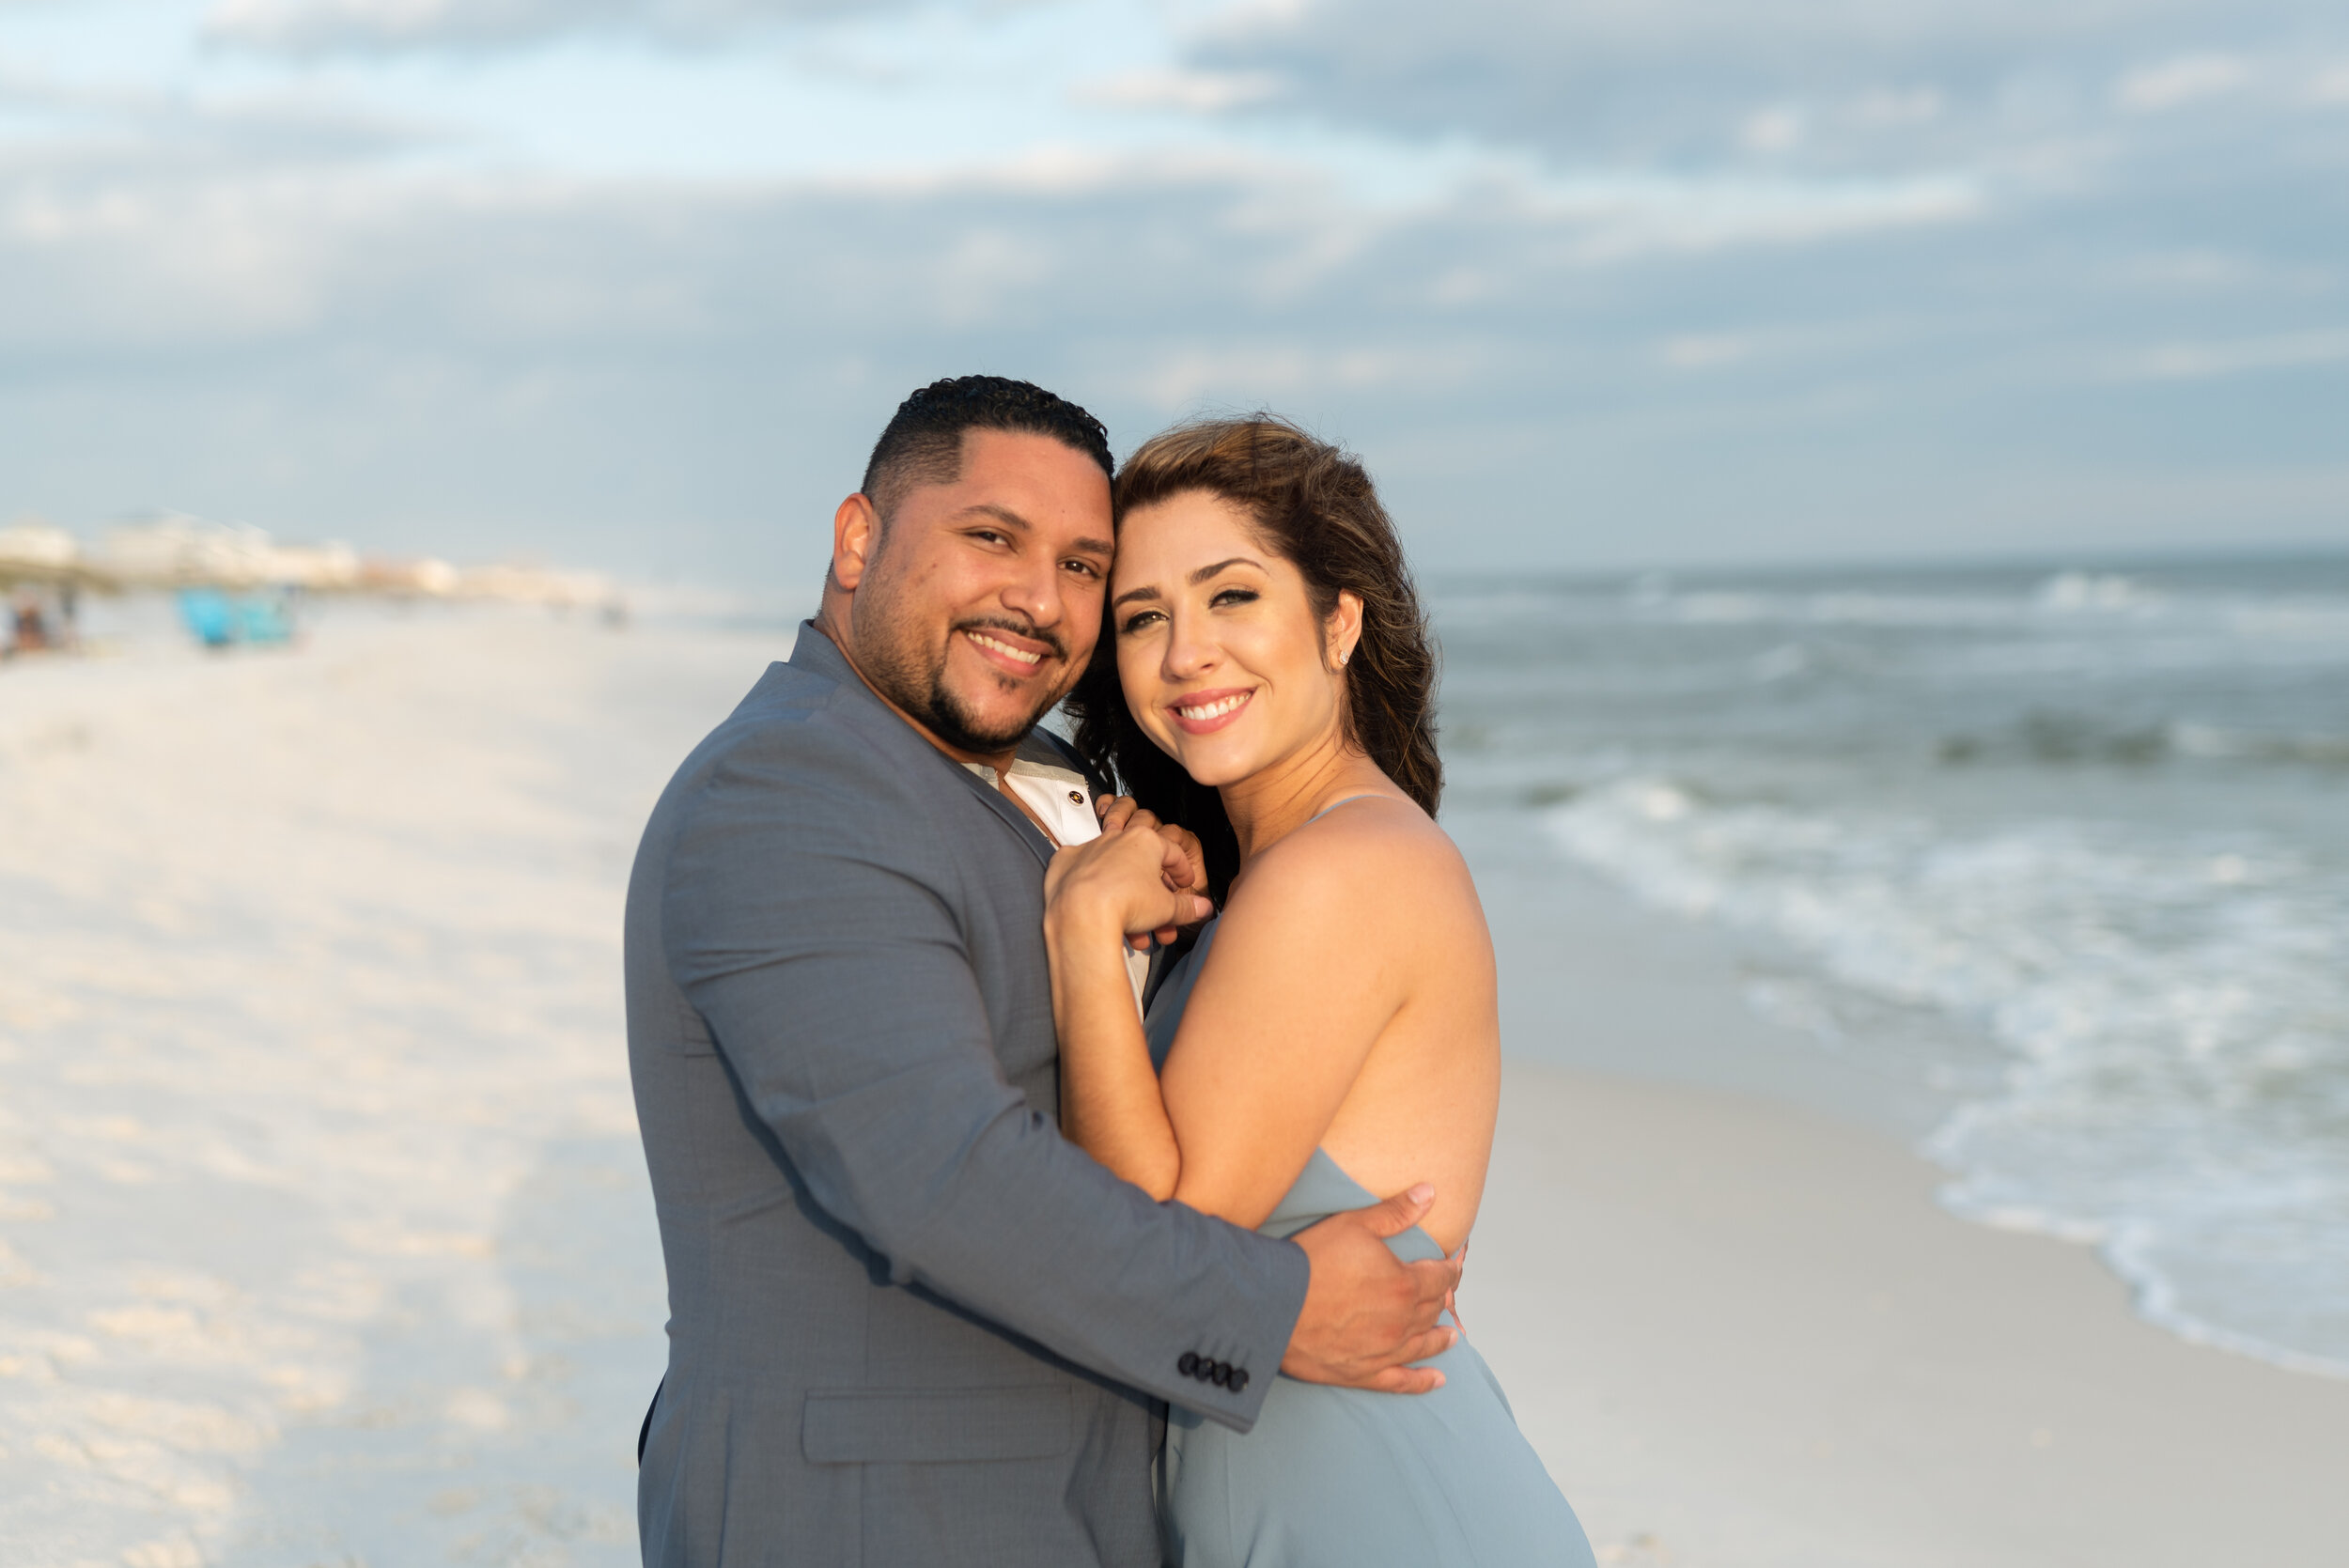 Pensacola Beach Engagement Photoshoot by Kristen Marcus Photography